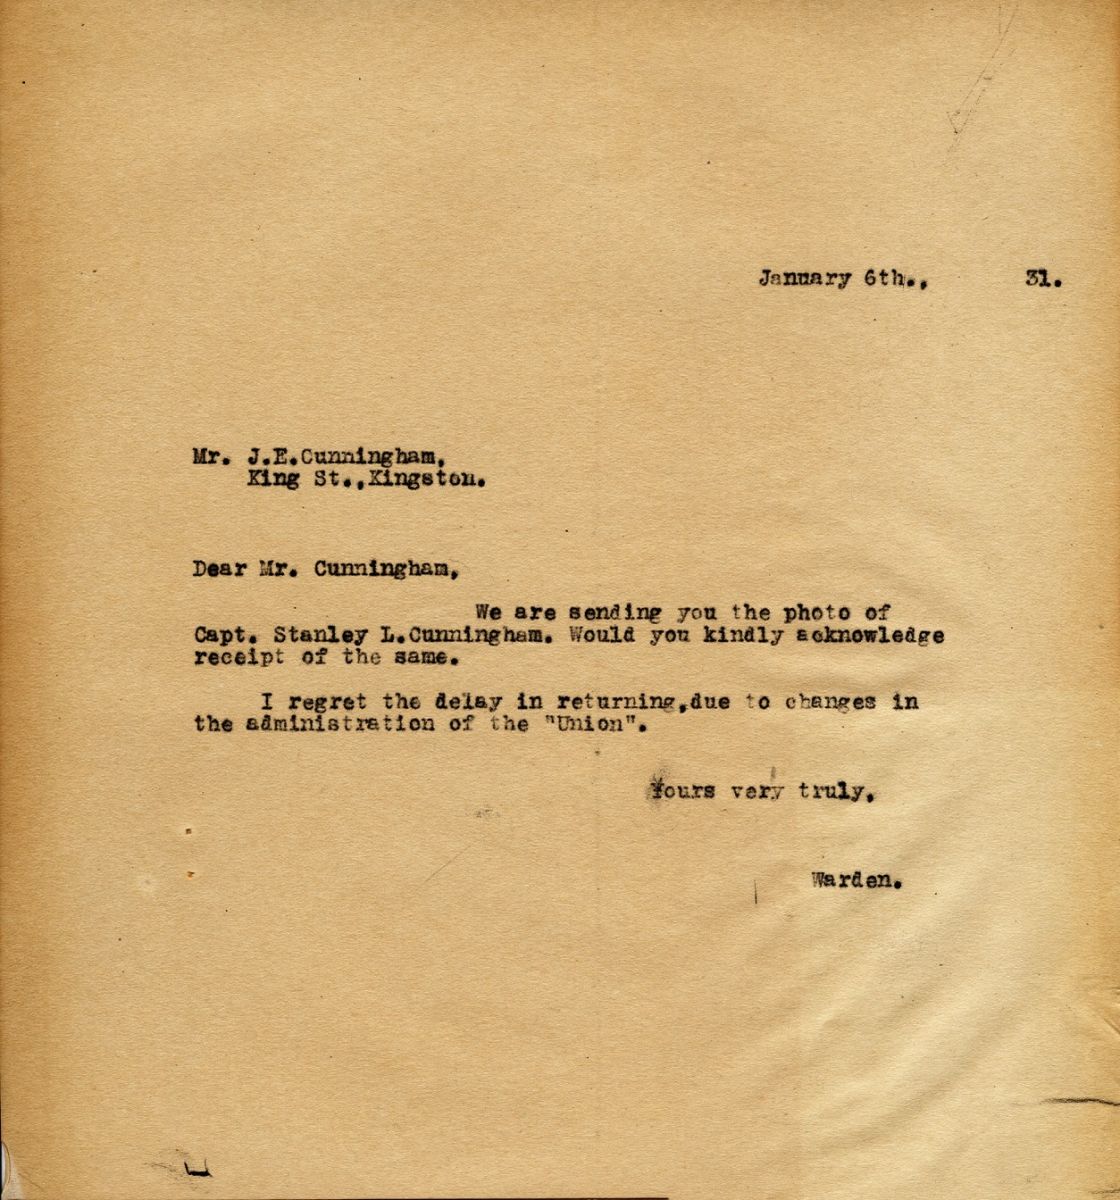 Letter from the Warden to Mr. J.E. Cunningham, 6th January 1931